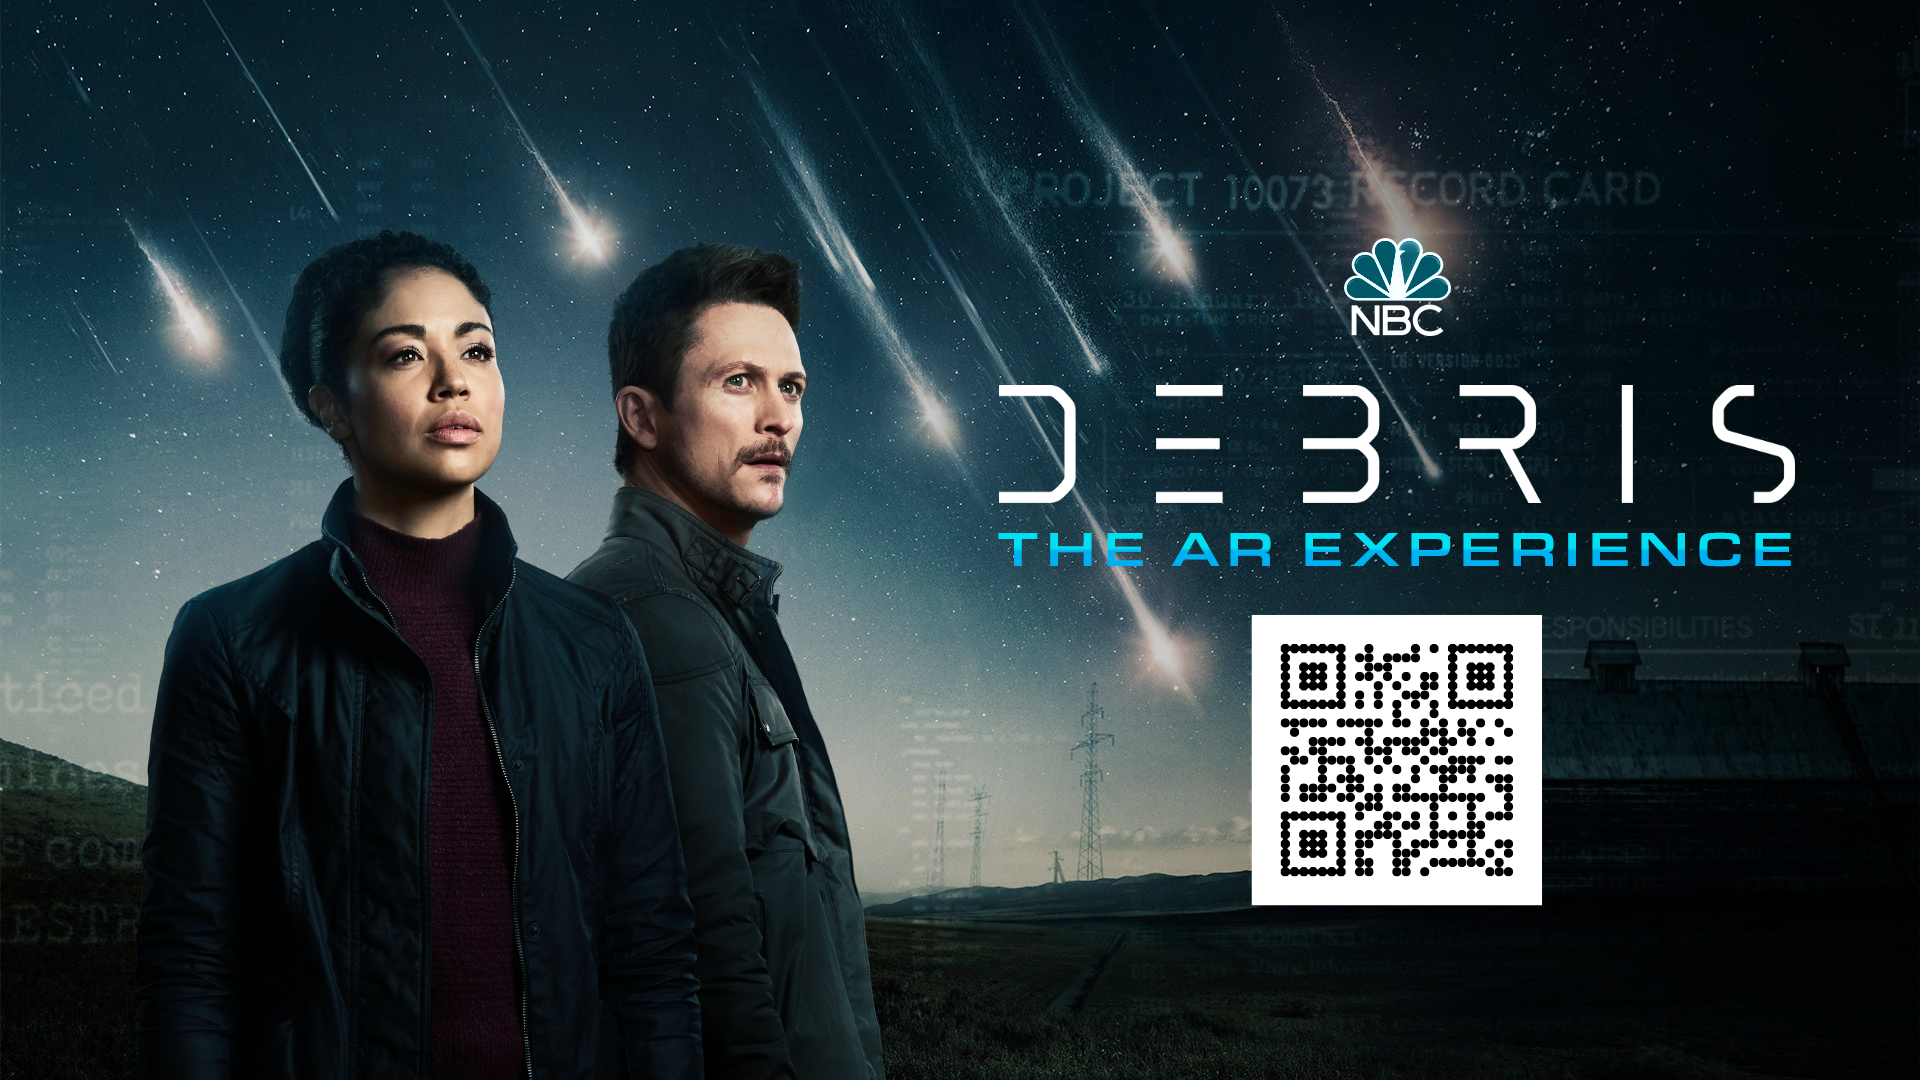 NBC uses WebAR to let viewers explore the mysterious anomaly from its new show “Debris”